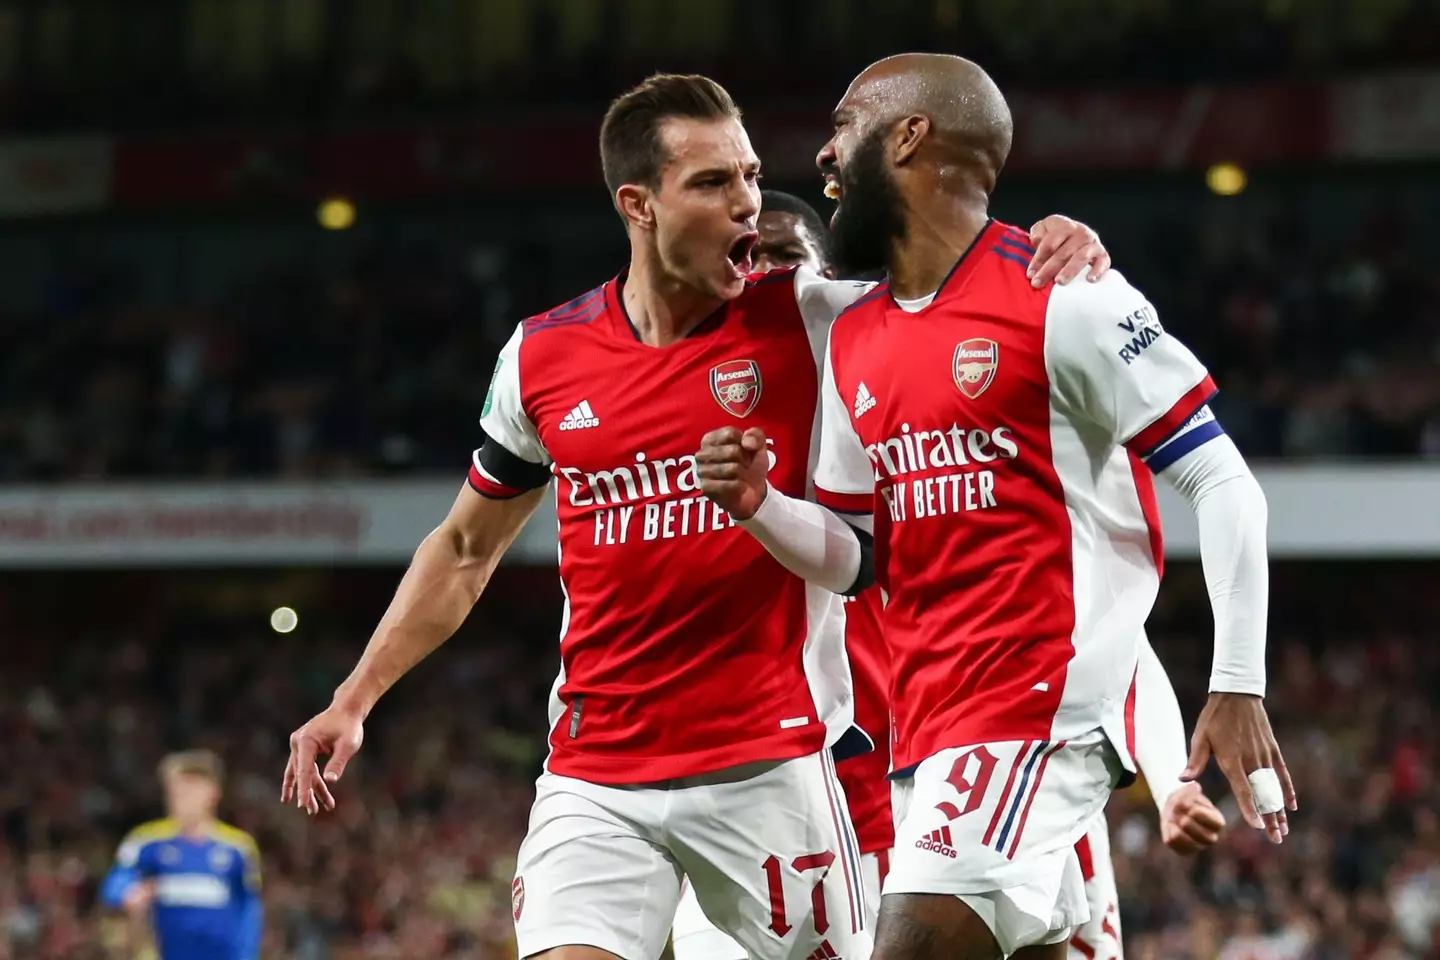 Lacazette and Cedric during a game last season. (Image